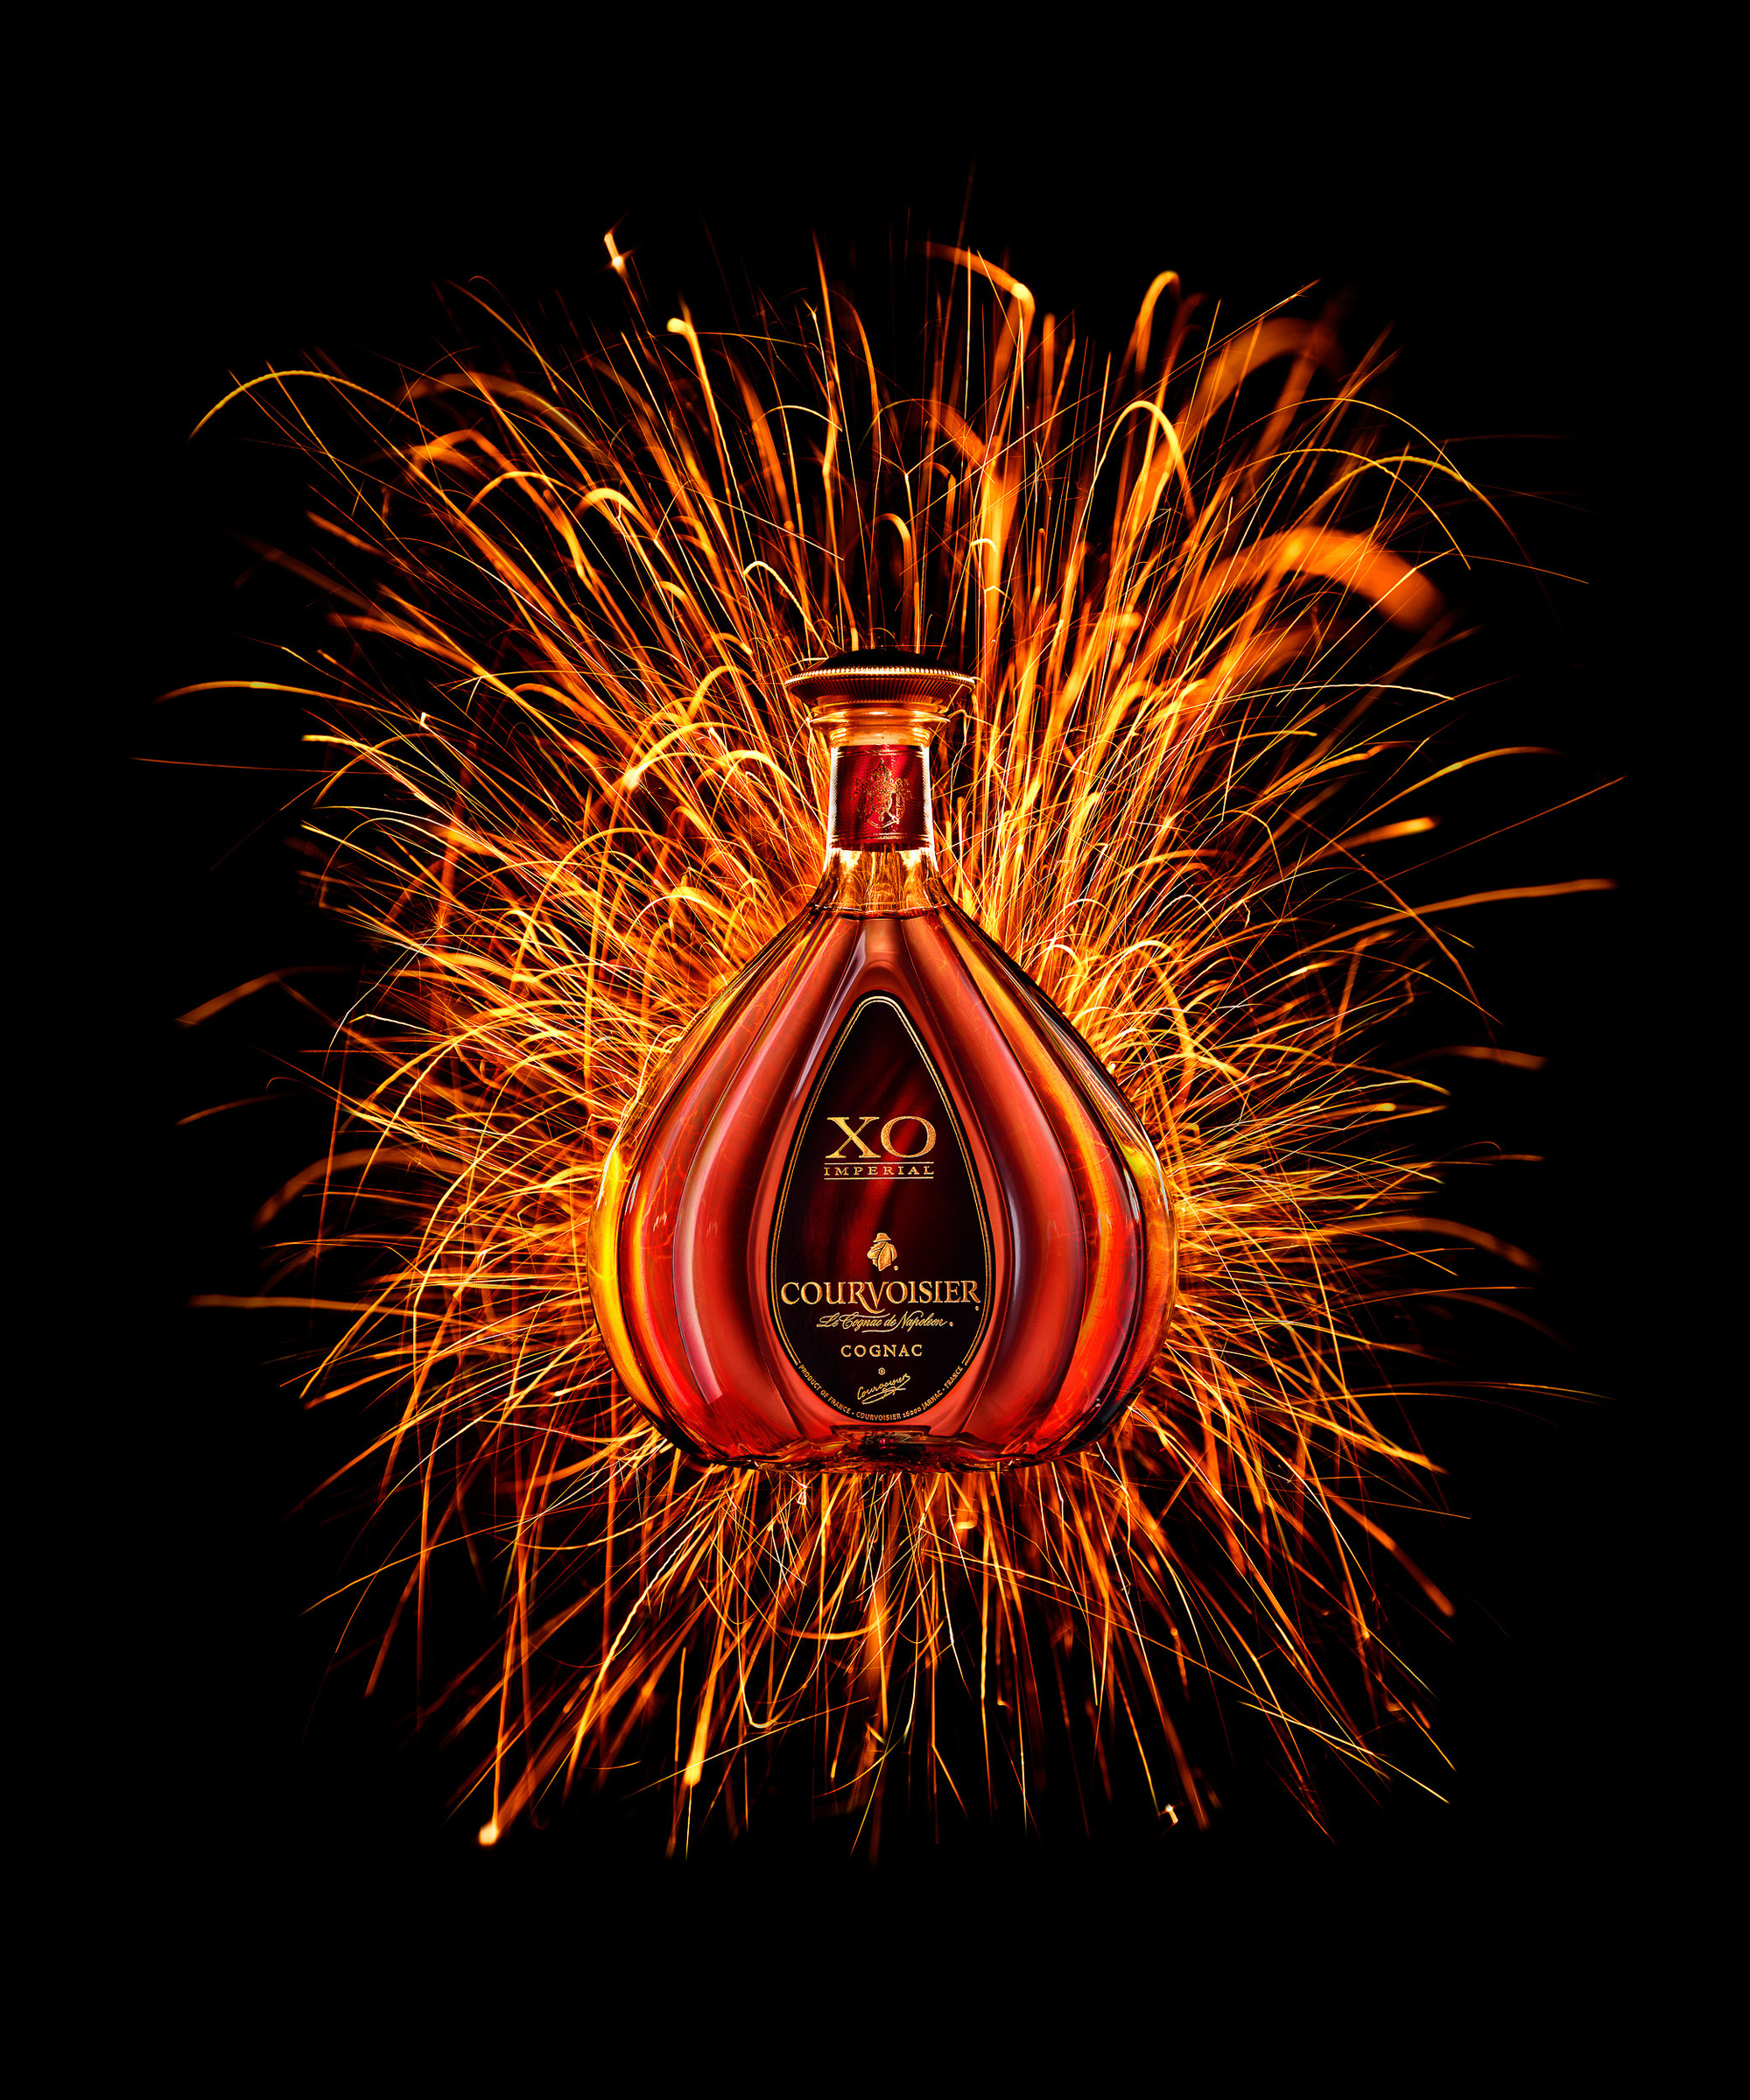 Courvoisier Sparks bottle photography. Beverage and liquid product & advertising photography by Timothy Hogan Studio in Los Angeles